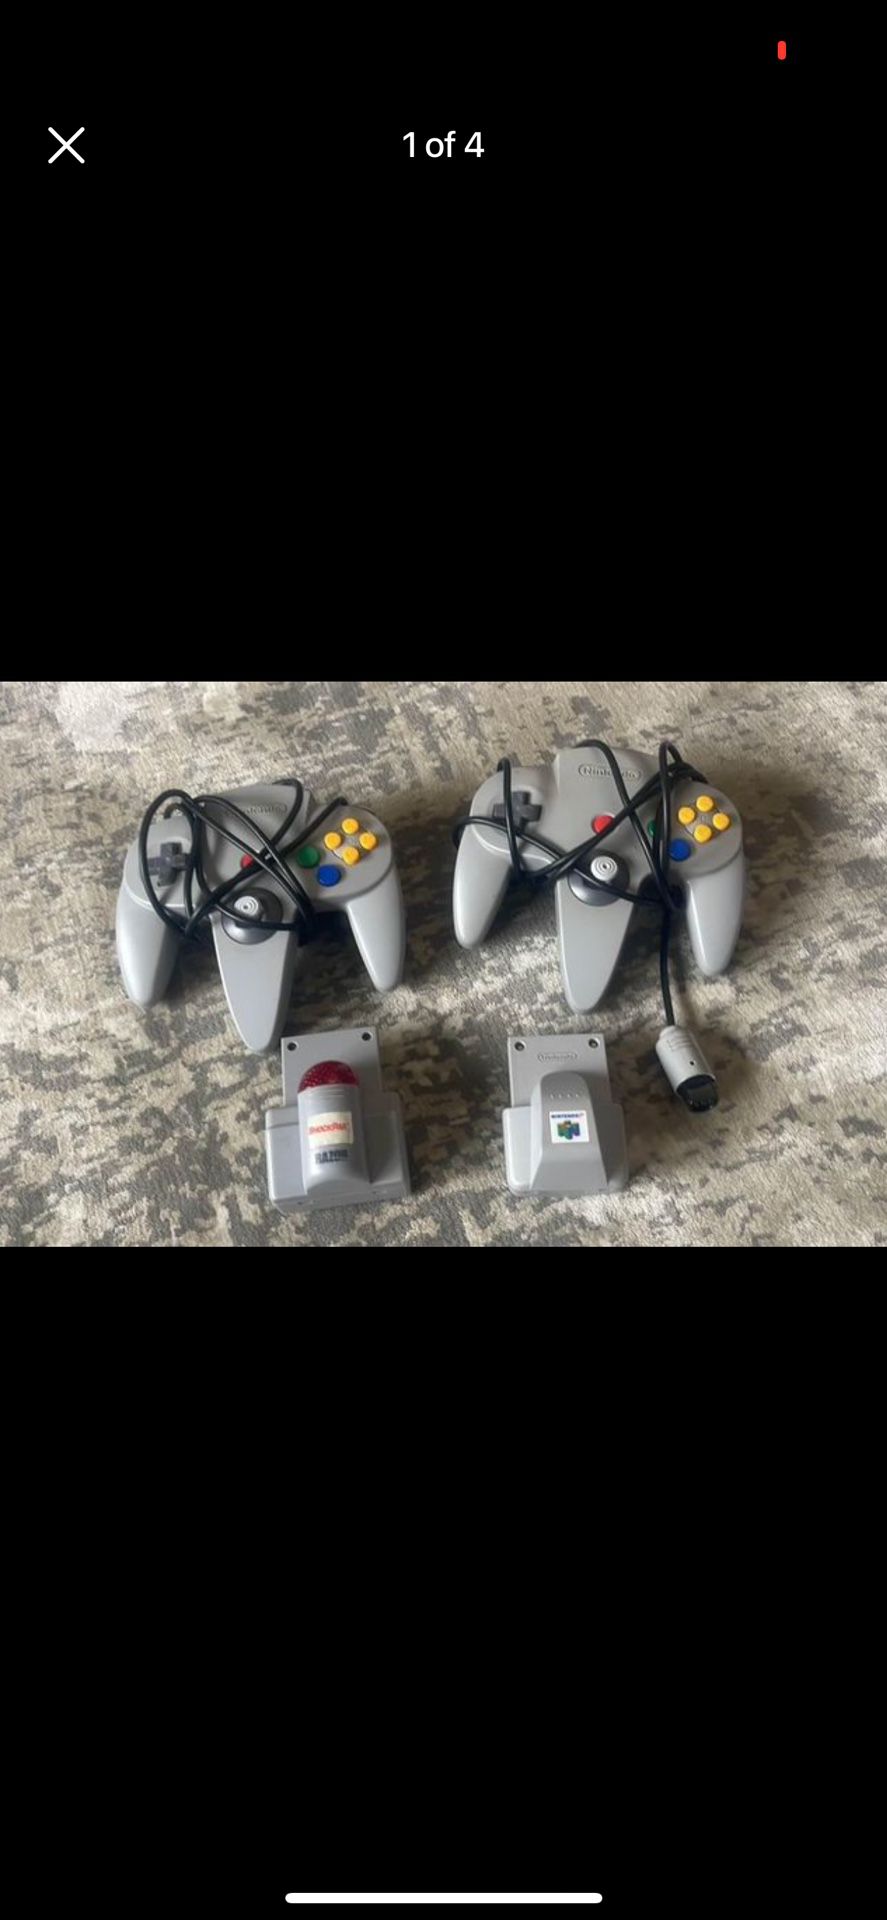 Nintendo 64 Gray Controllers With Adapters, $40 Each Or Both For $70